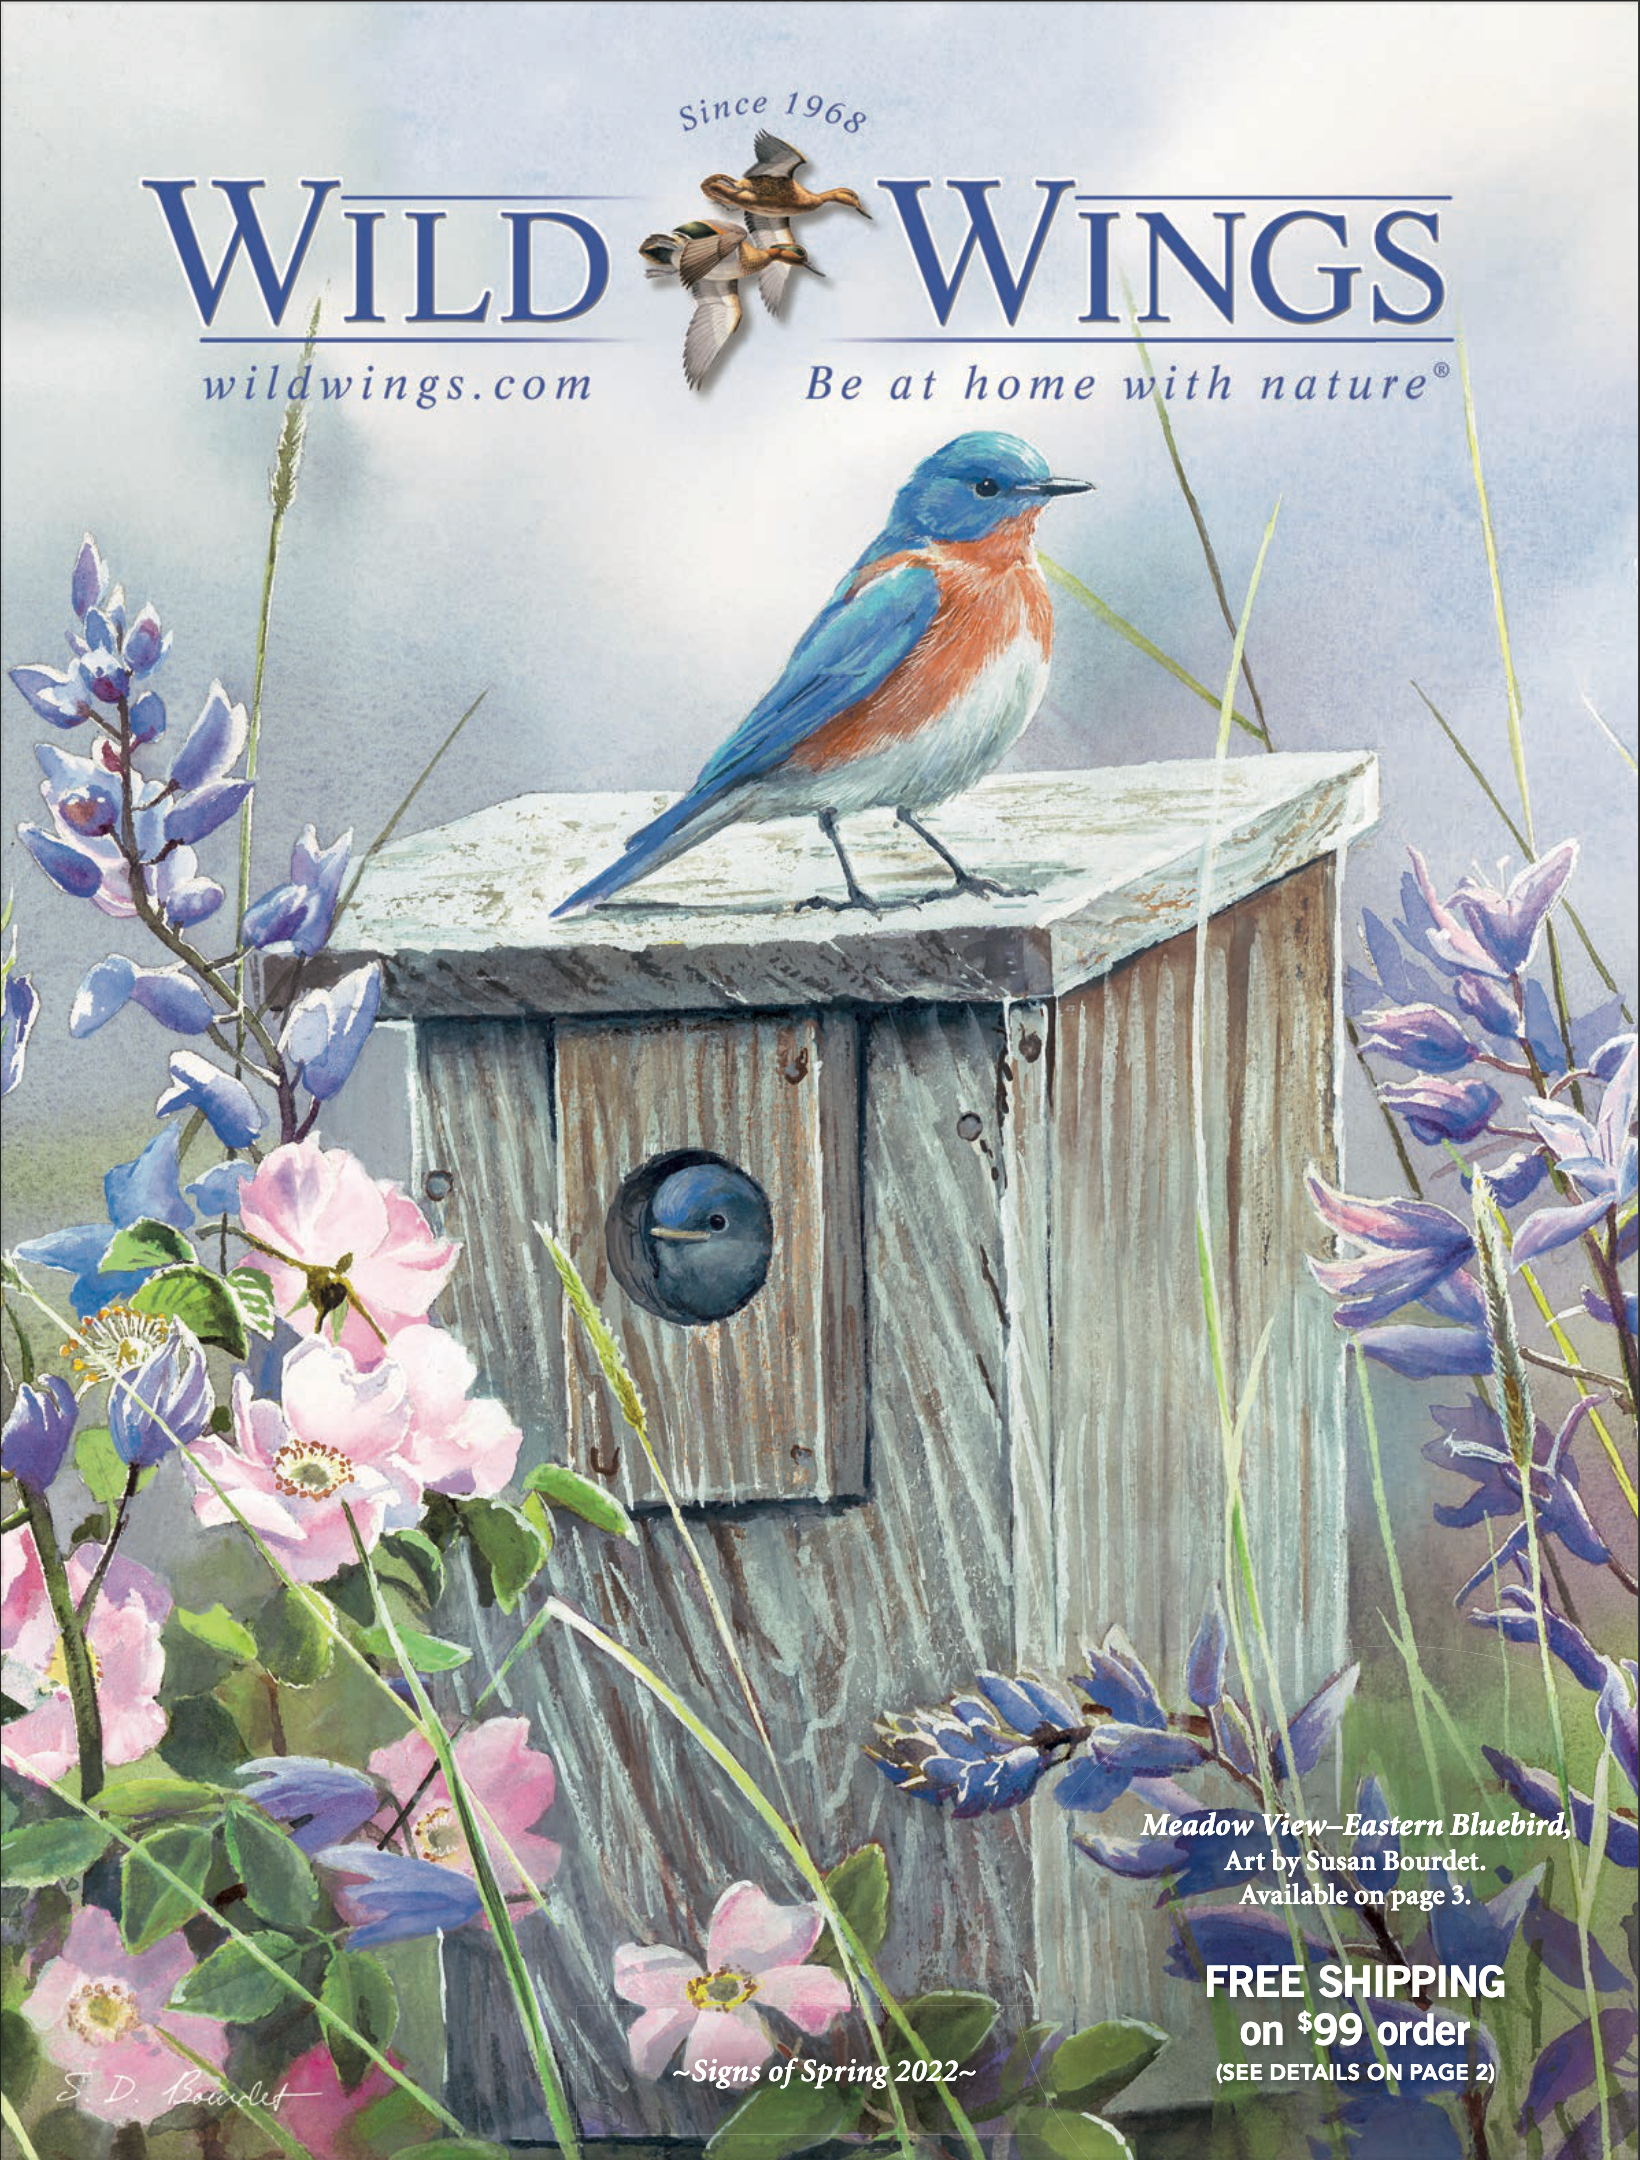 Wild Wings Sign of Spring 2022 Catalog